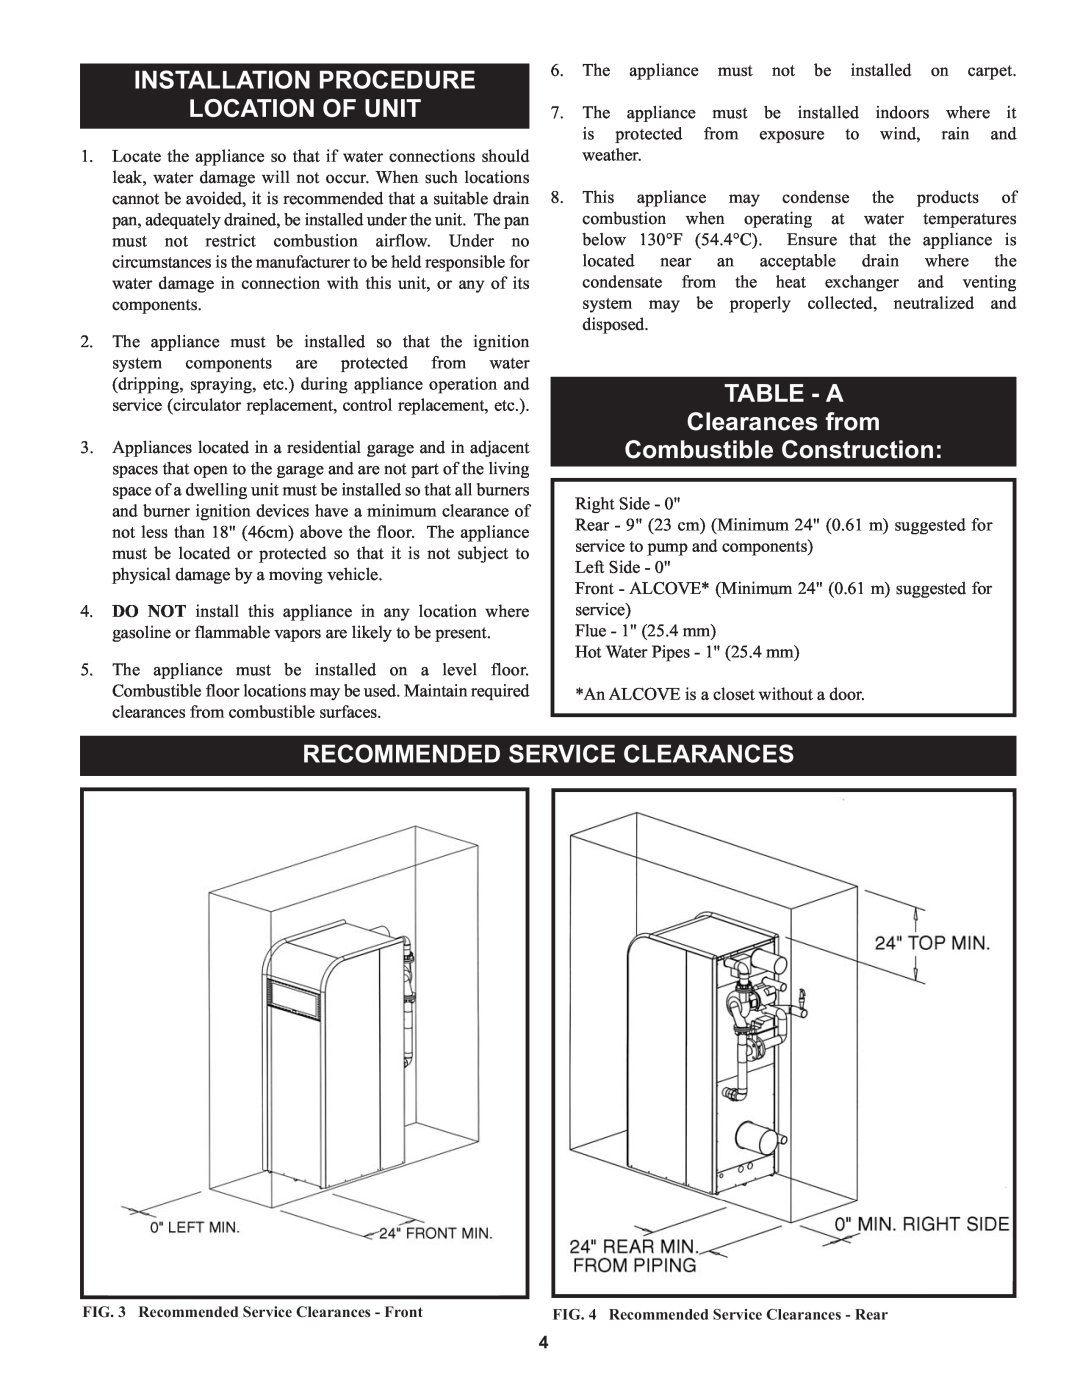 Lochinvar 000 through 2, 1 Installation Procedure Location Of Unit, TABLE - A Clearances from, Combustible Construction 